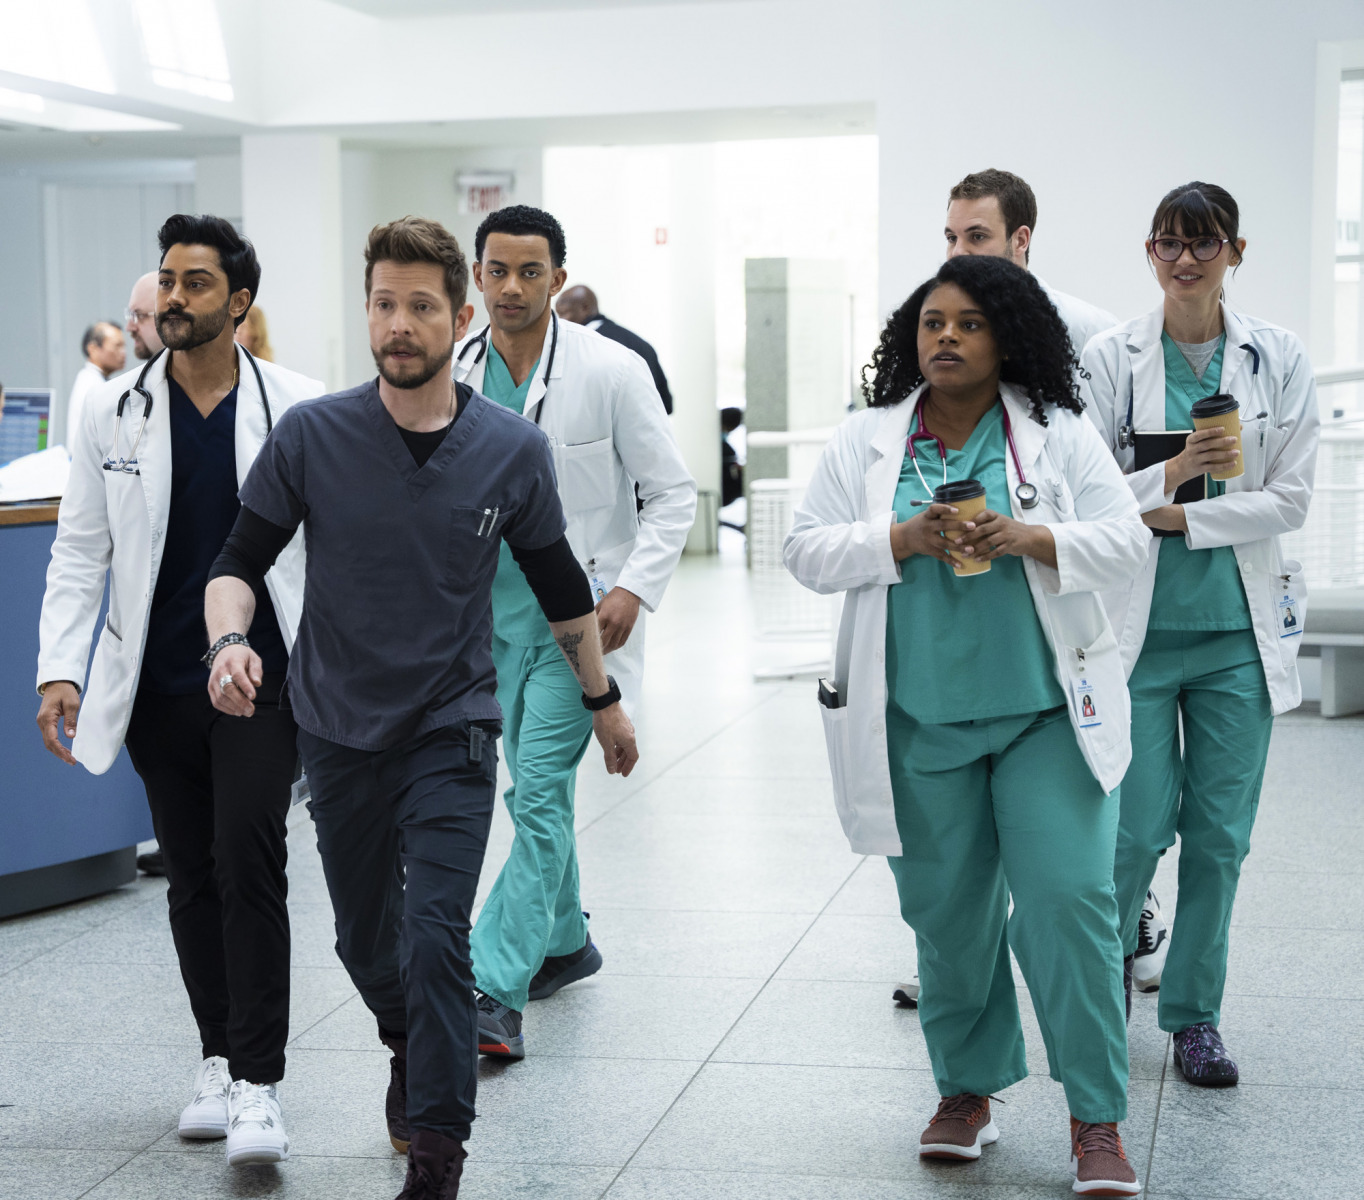 THE RESIDENT: L-R: Manish Dayal, Matt Czuchry, Miles Fowler, Zsane Jhe, Alan Aisenberg and Mick Szal in the “He’d Really Like to put in a Central Line“ episode of THE RESIDENT airing Tuesday, Nov. 30 (8:00-9:00 PM ET/PT) on FOX. ©2021 Fox Media LLC Cr: Nathan Bolster/FOX